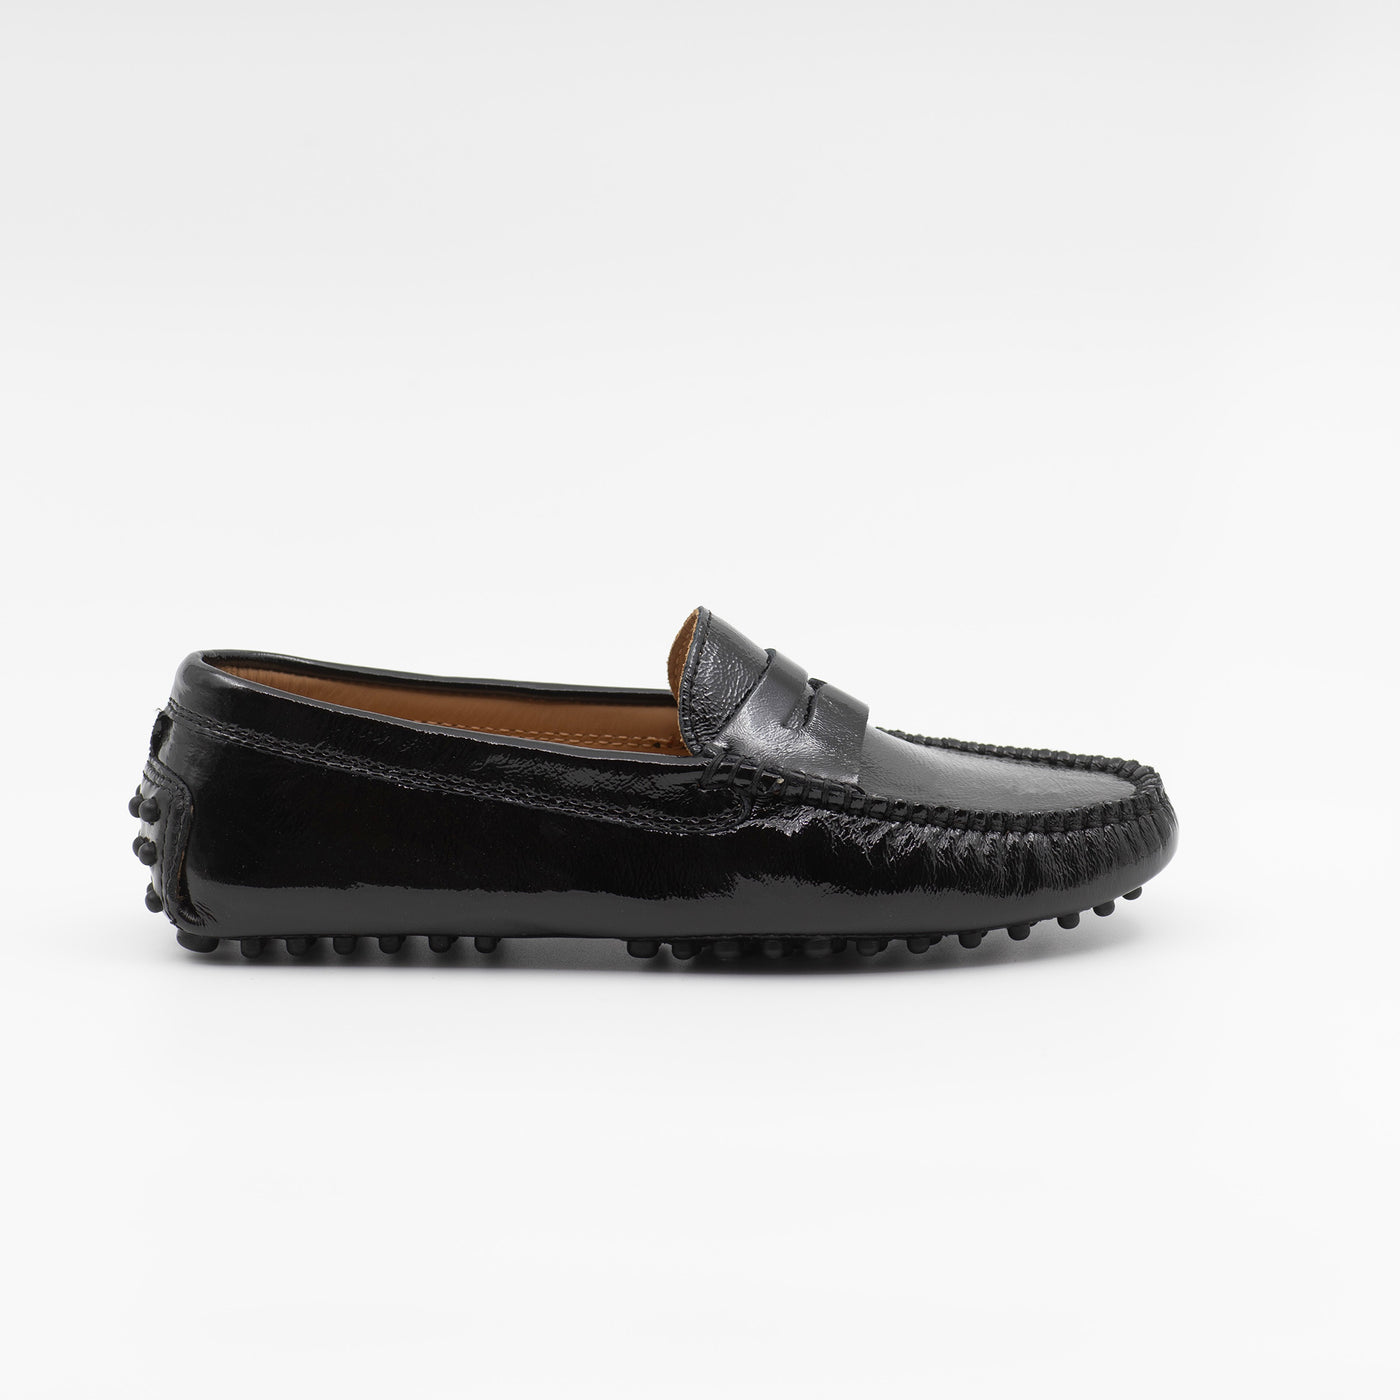 Gommino loafer in black patent leather